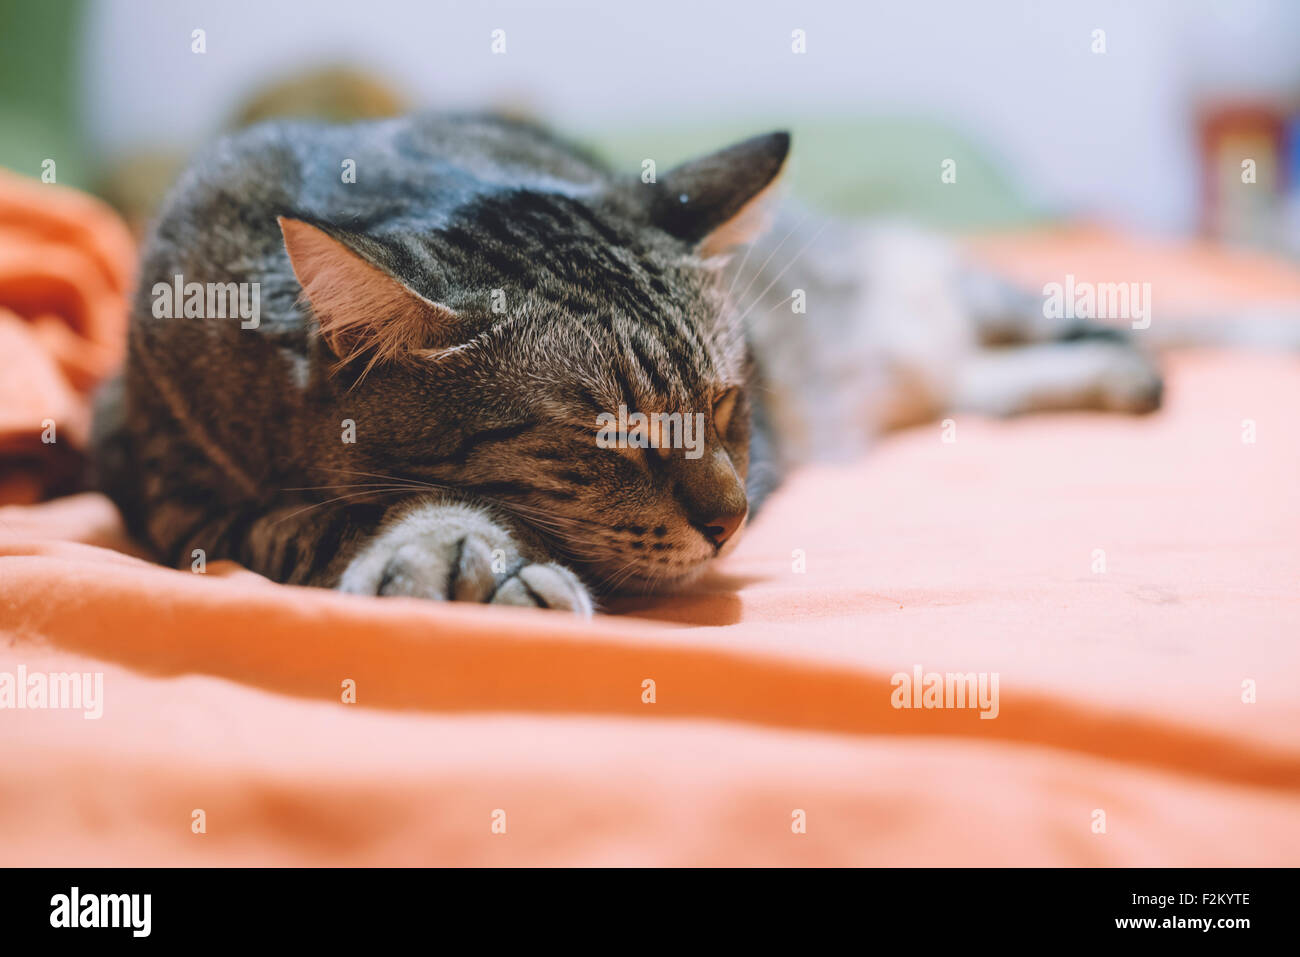 Tabby cat sleeping on bed Banque D'Images